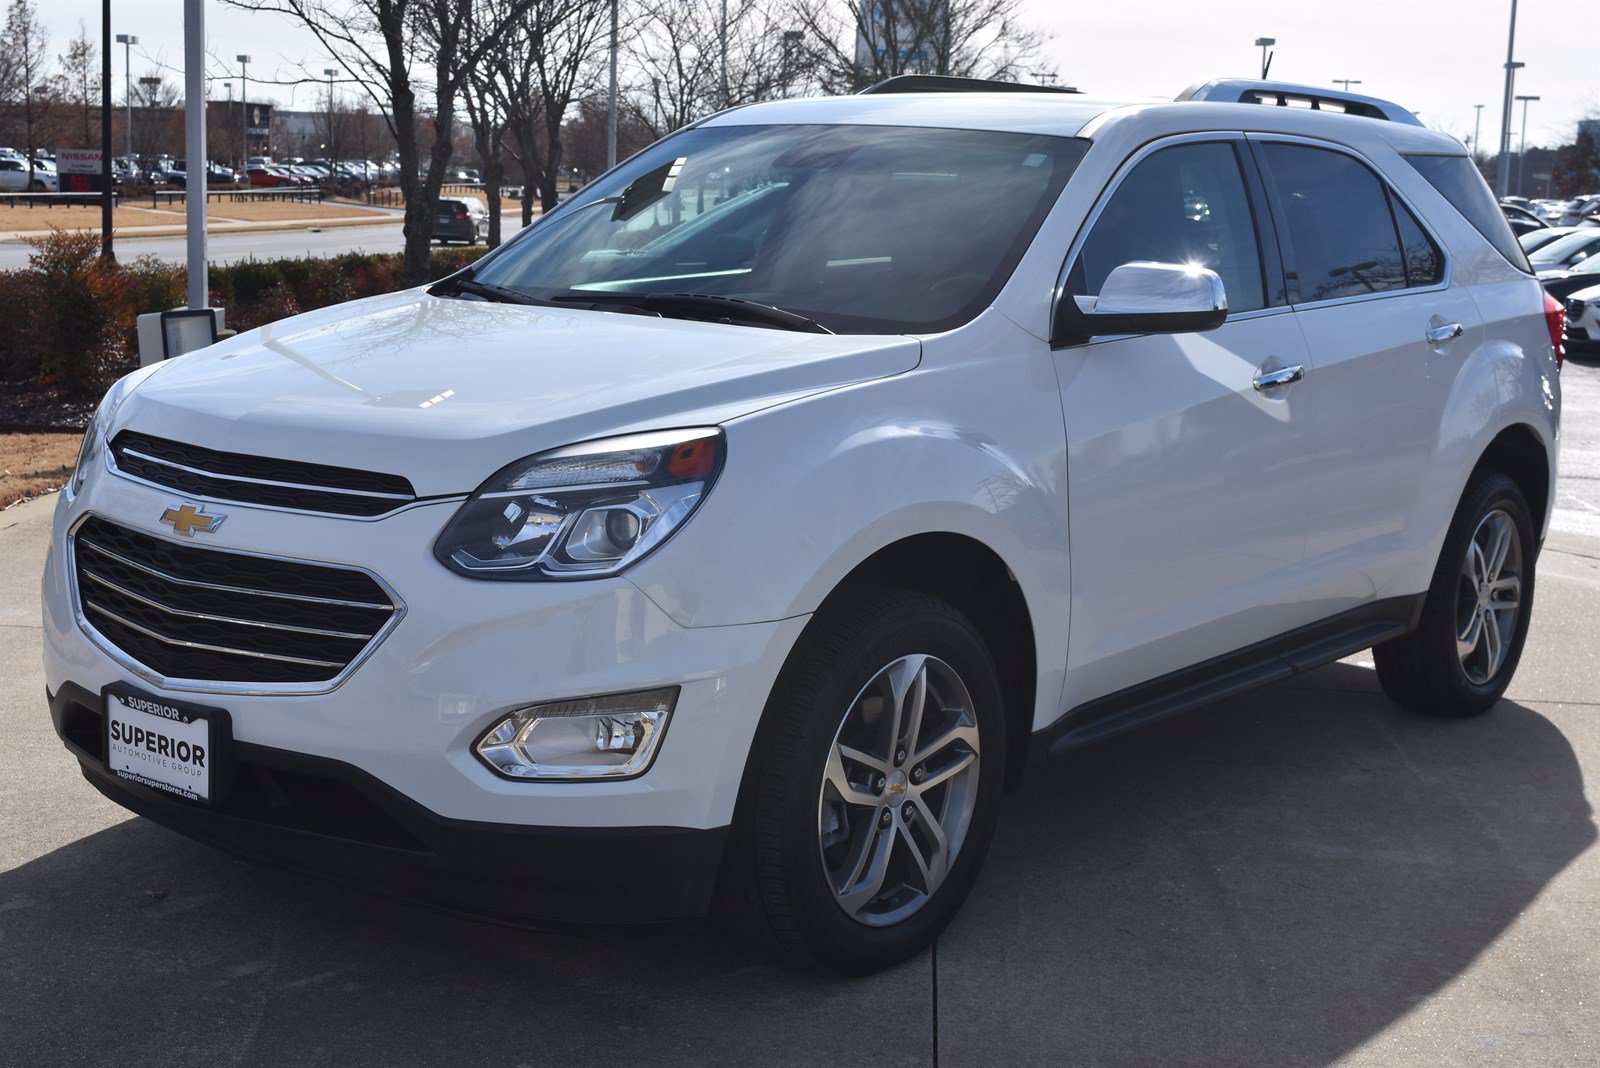 new 2017 equinox for sale